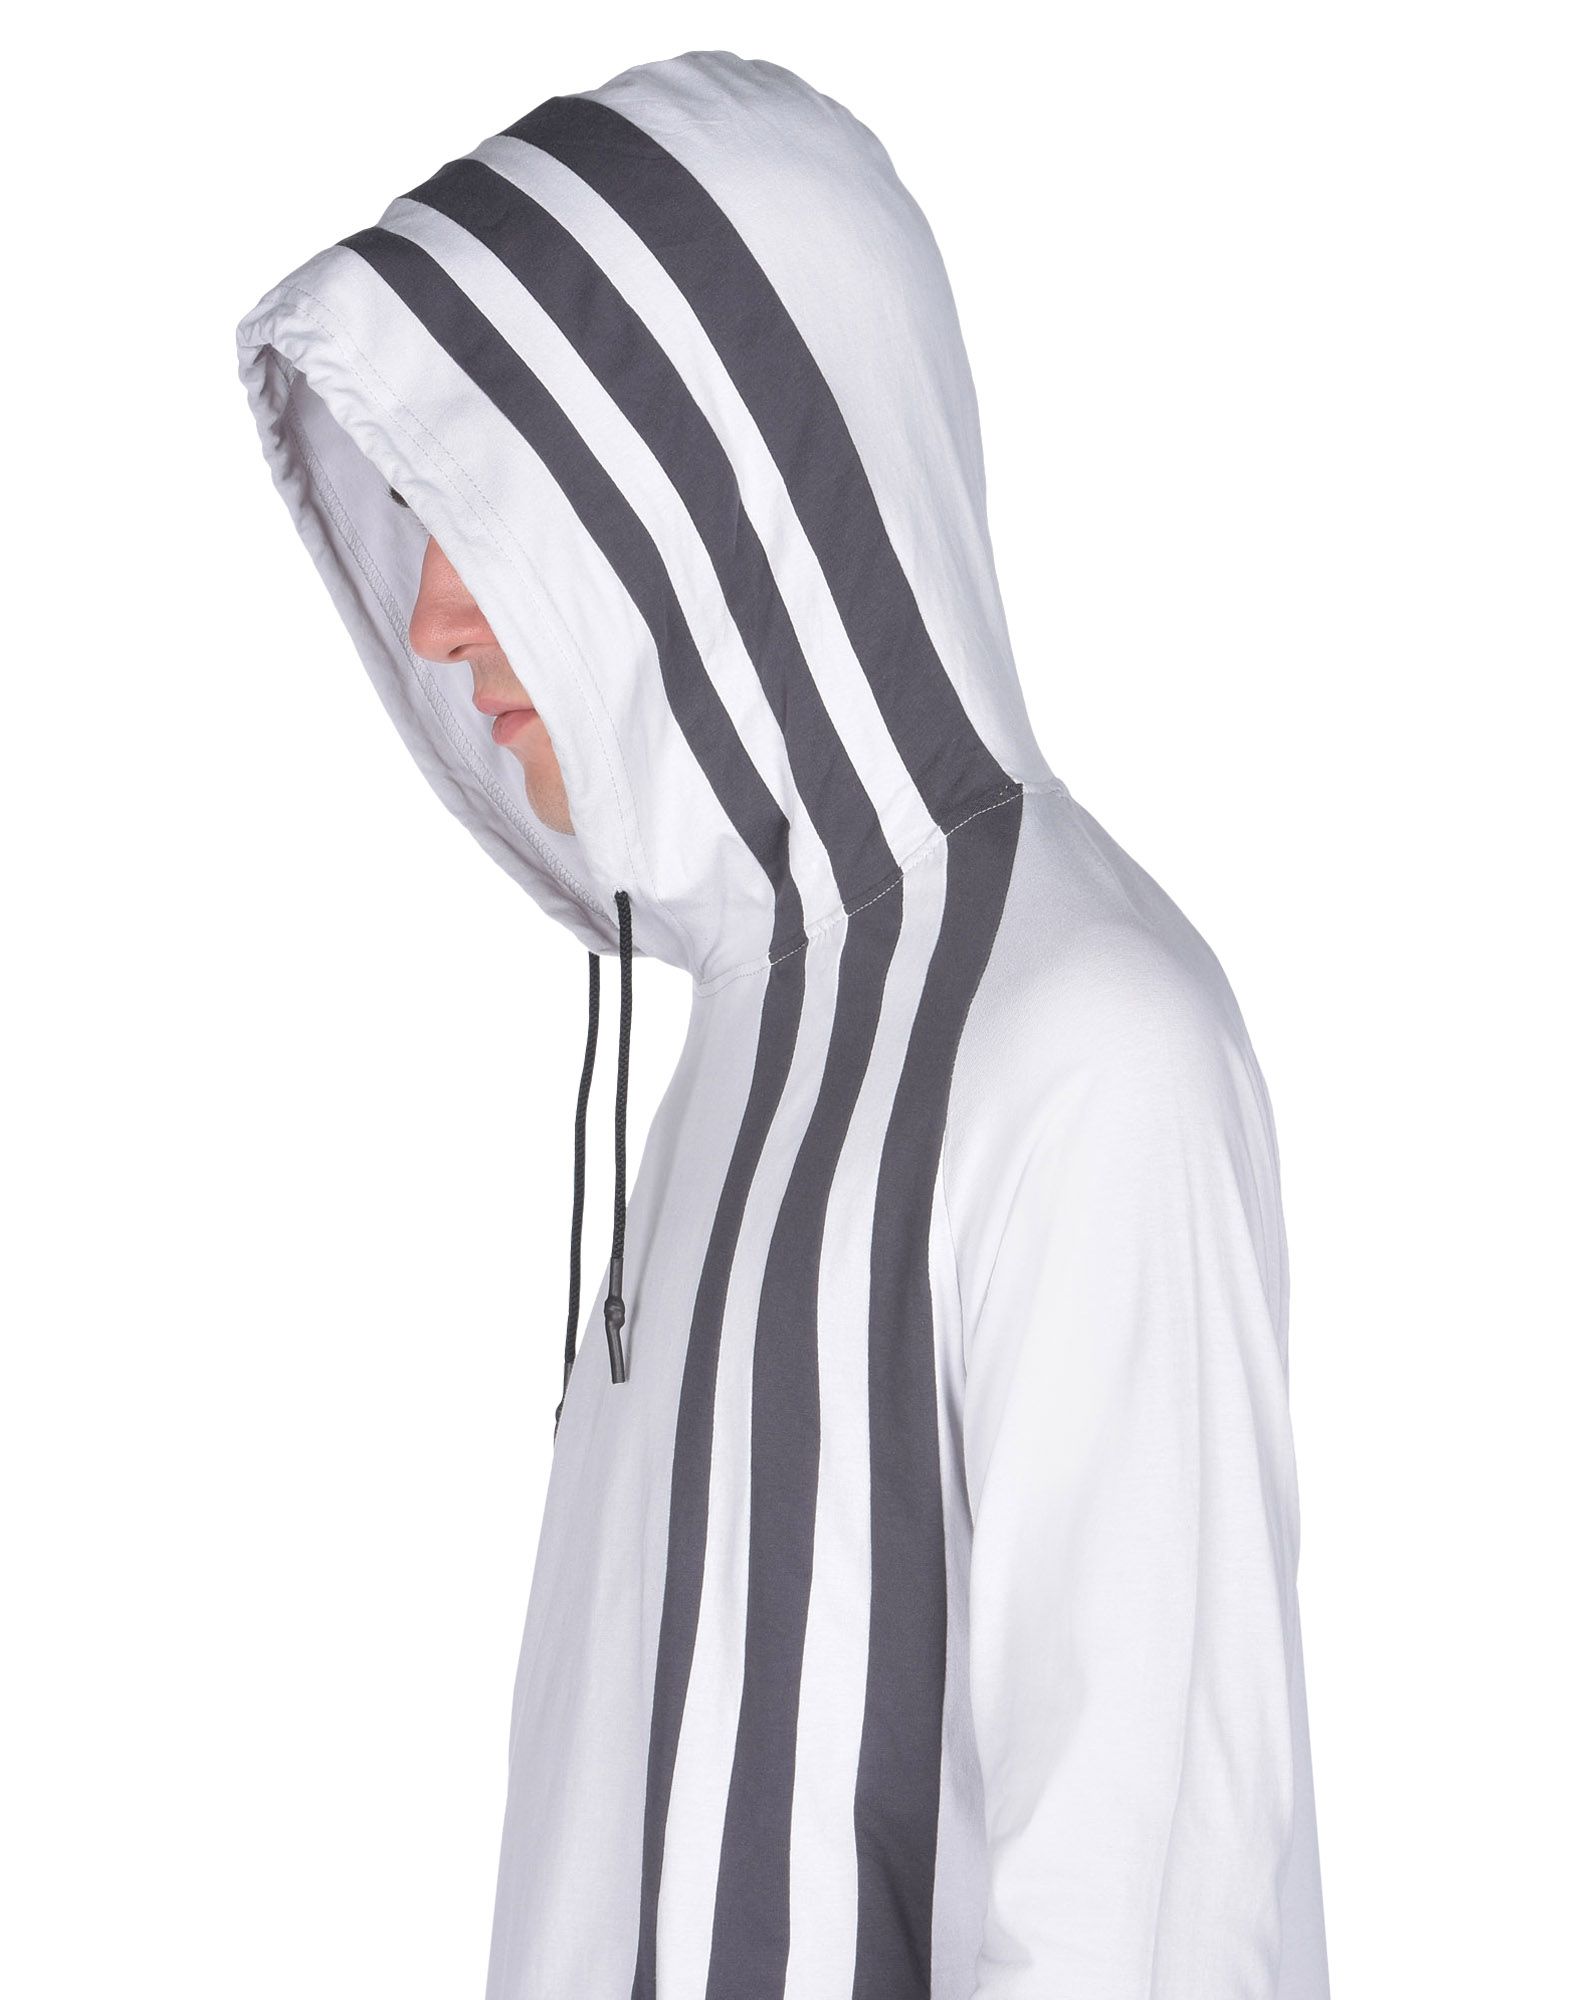 Y 3 3 STRIPES HOODIE for Men | Adidas Y-3 Official Store